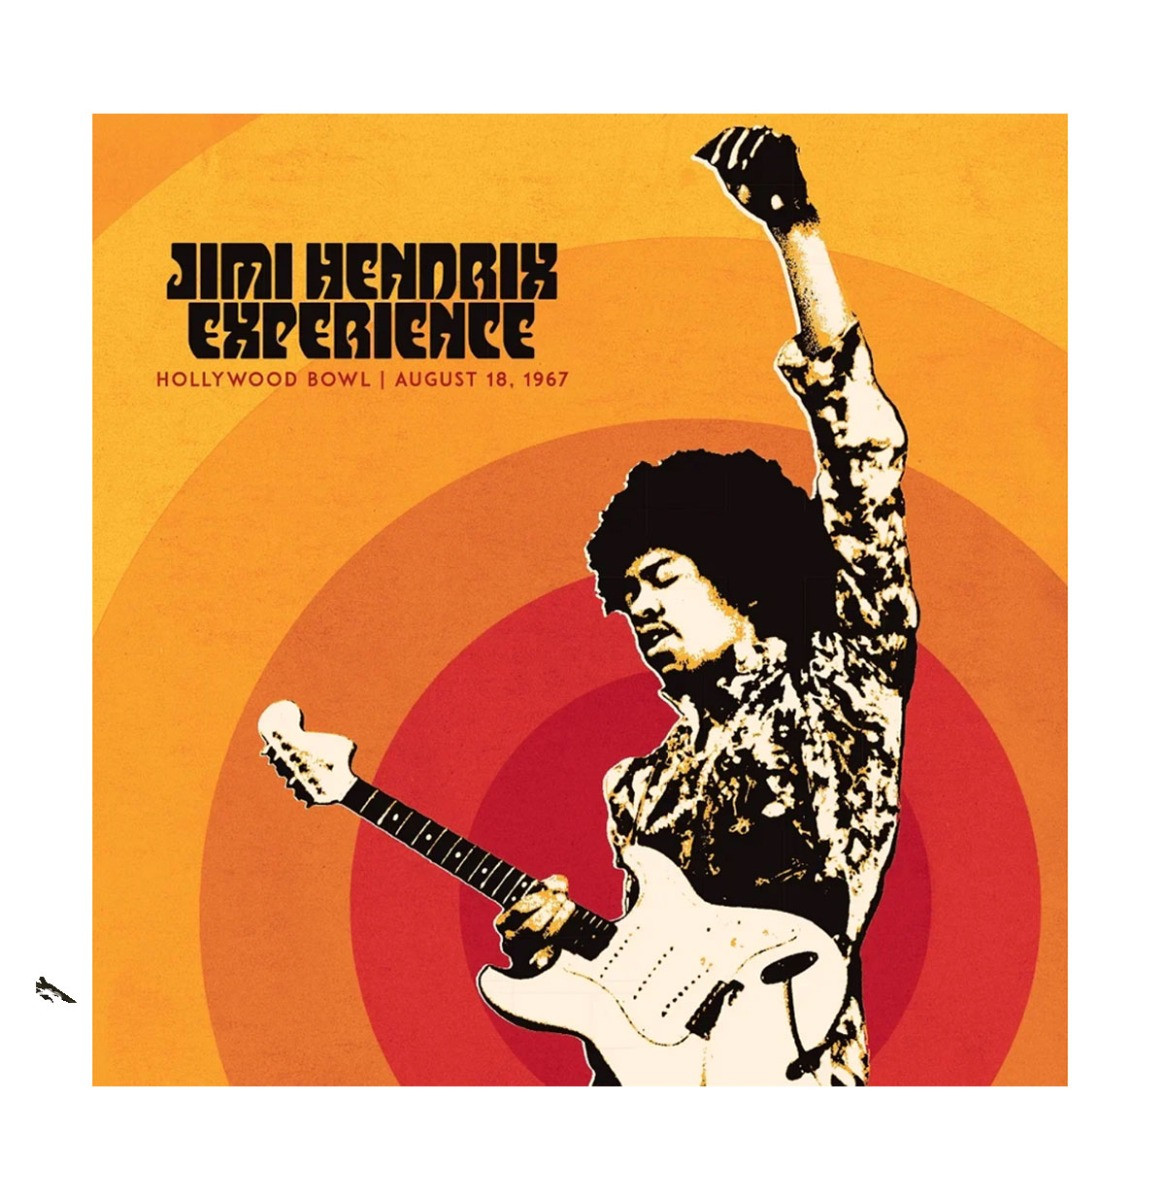 Jimi Hendrix Experience - Hollywood Bowl August 18, 1967 LP